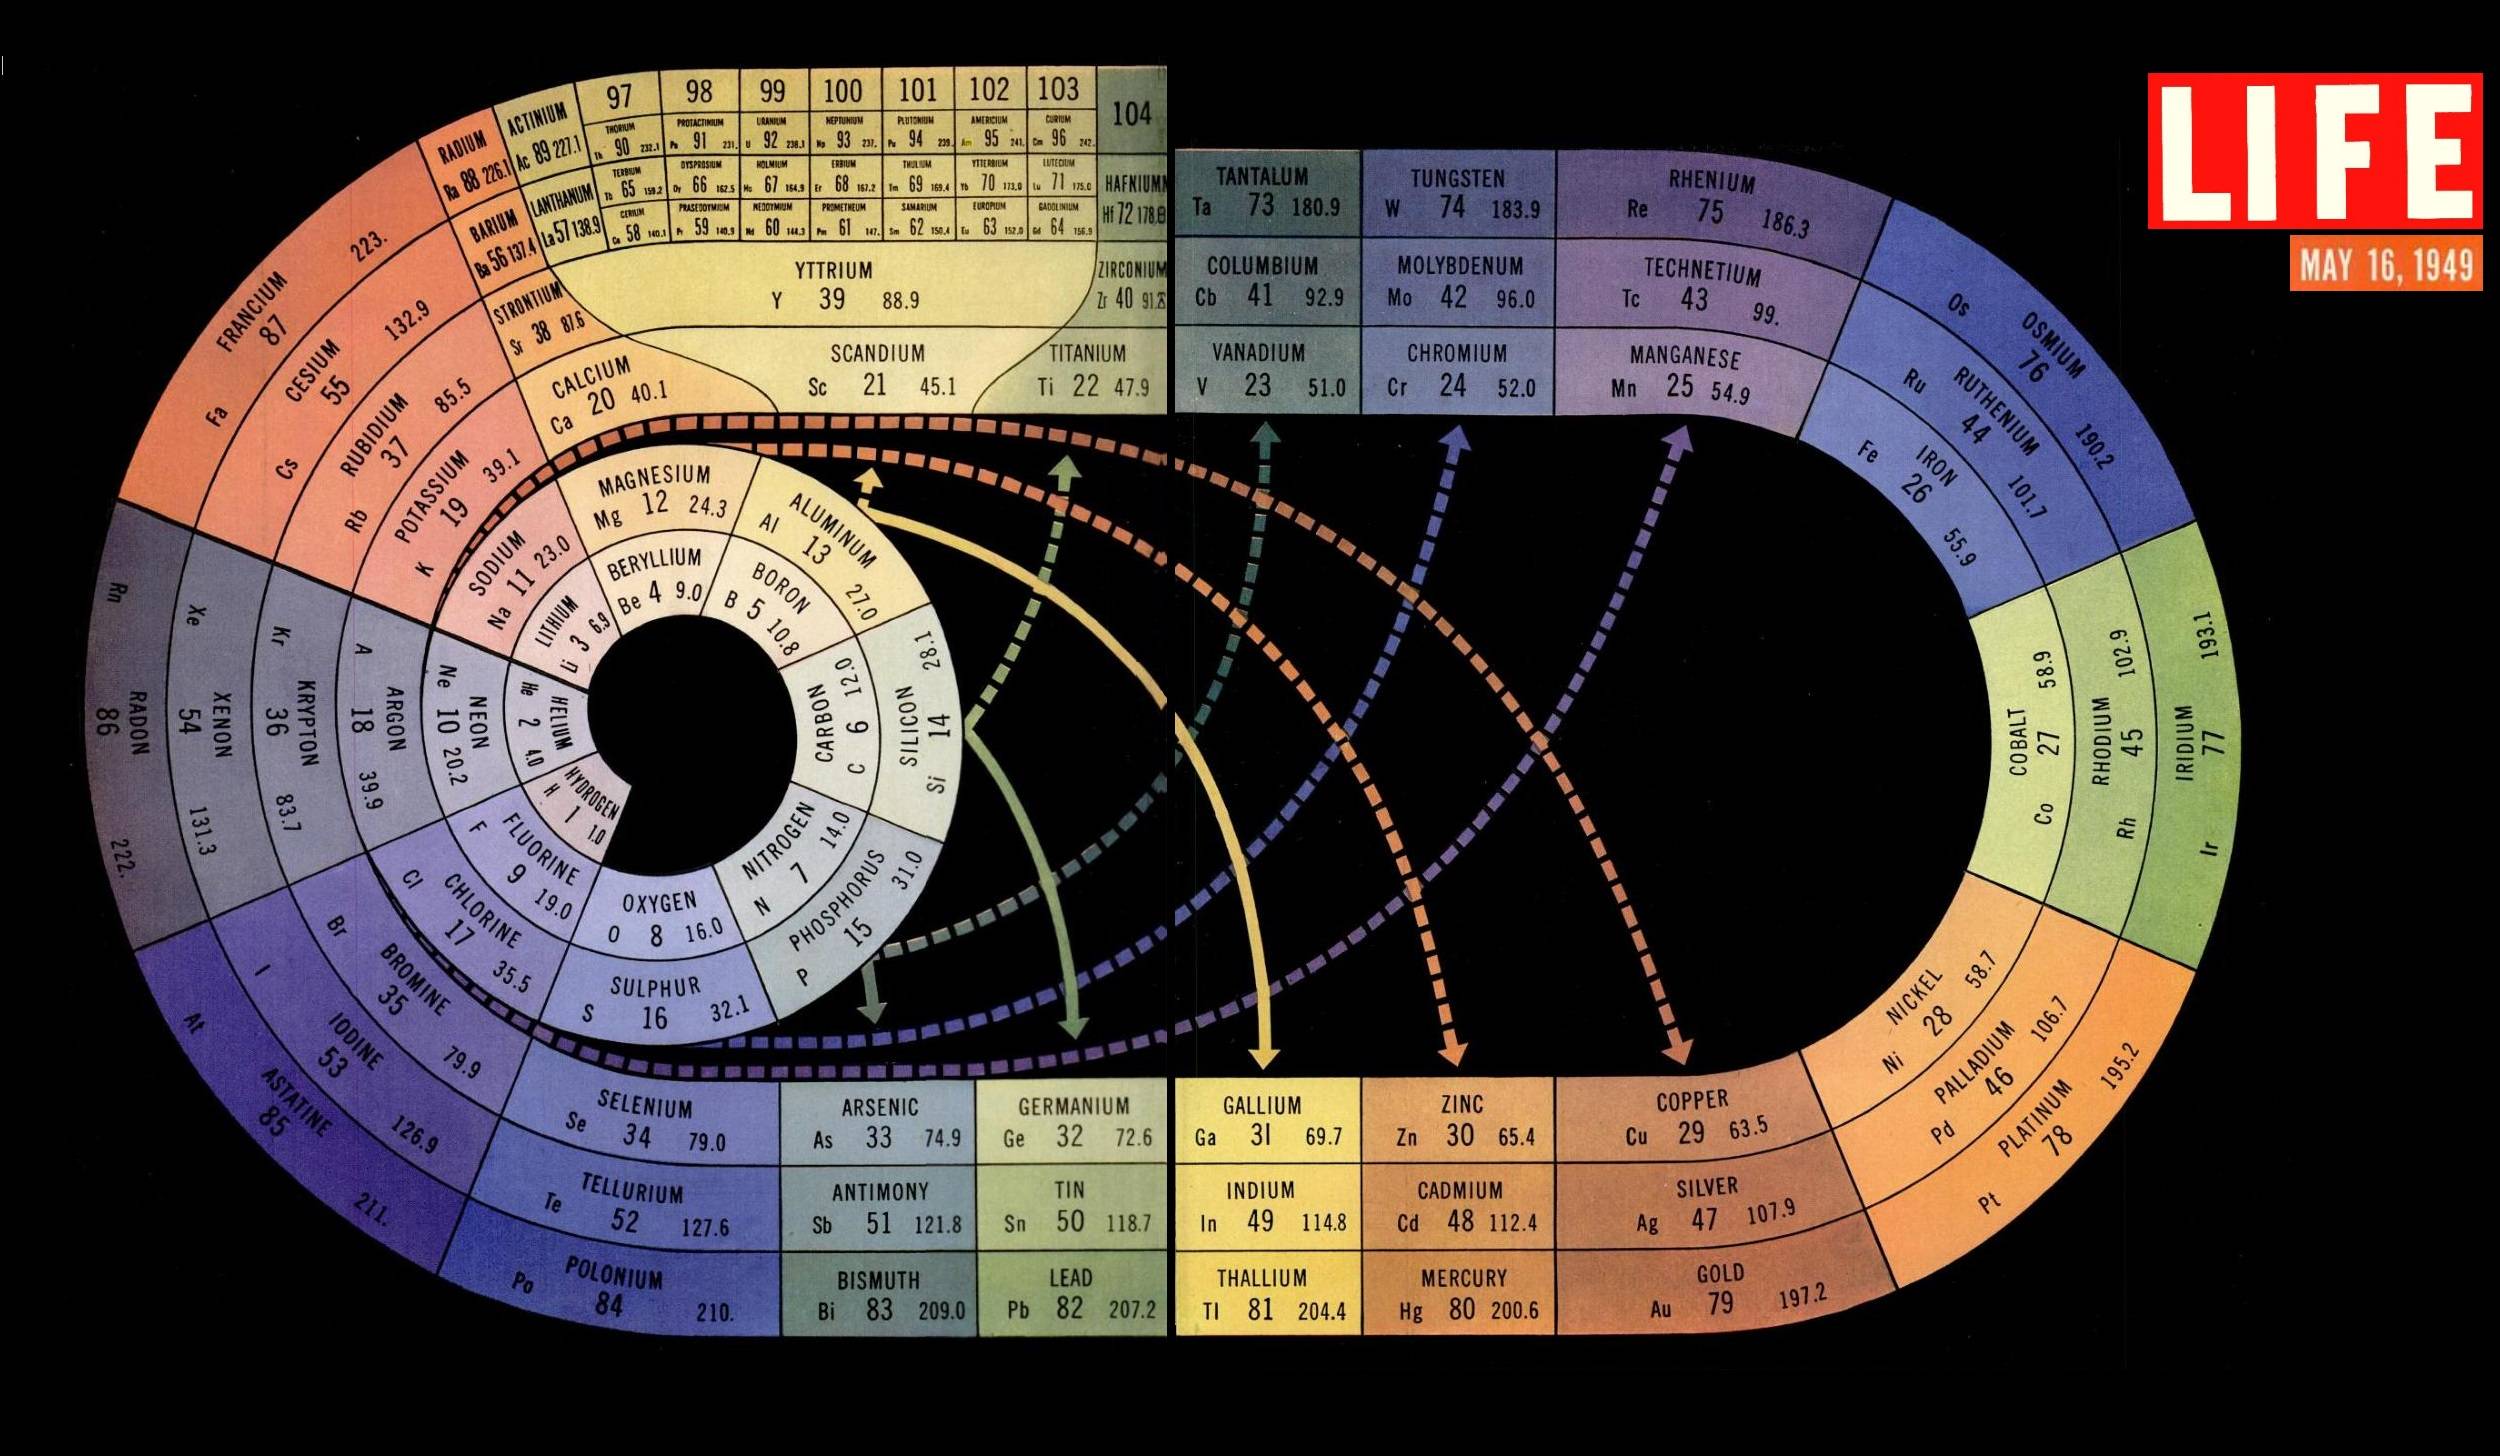 Have This Periodic Table As My Desktop Background